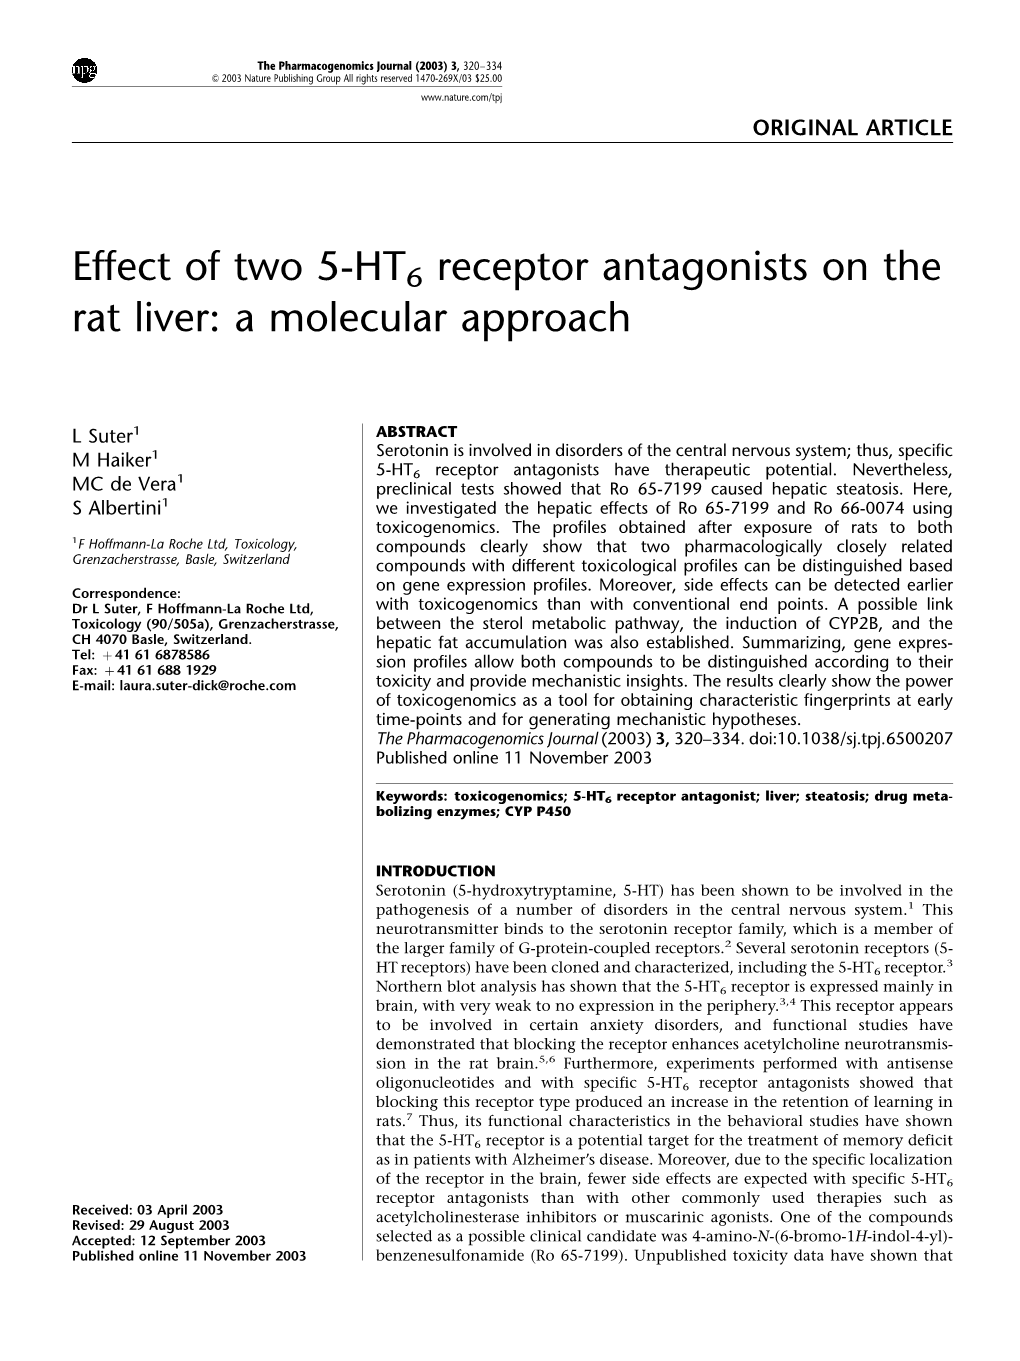 Effect of Two 5-HT6 Receptor Antagonists on the Rat Liver: a Molecular Approach